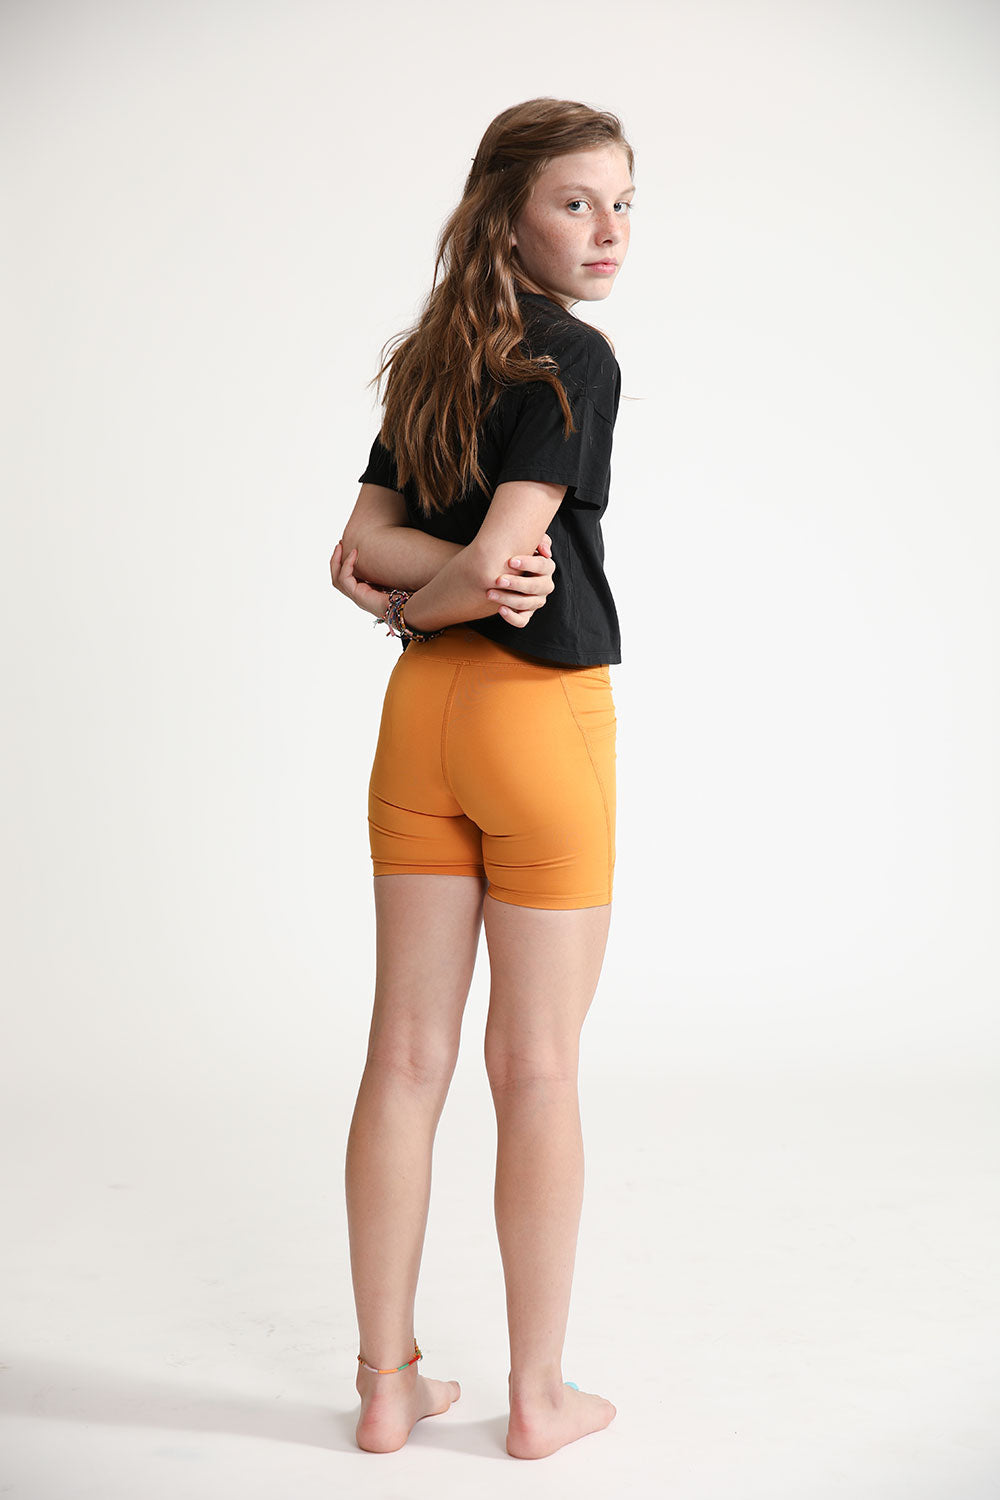 Young girl wearing Everyway kids activewear. Featuring Cycle Shorts in Inca Gold.